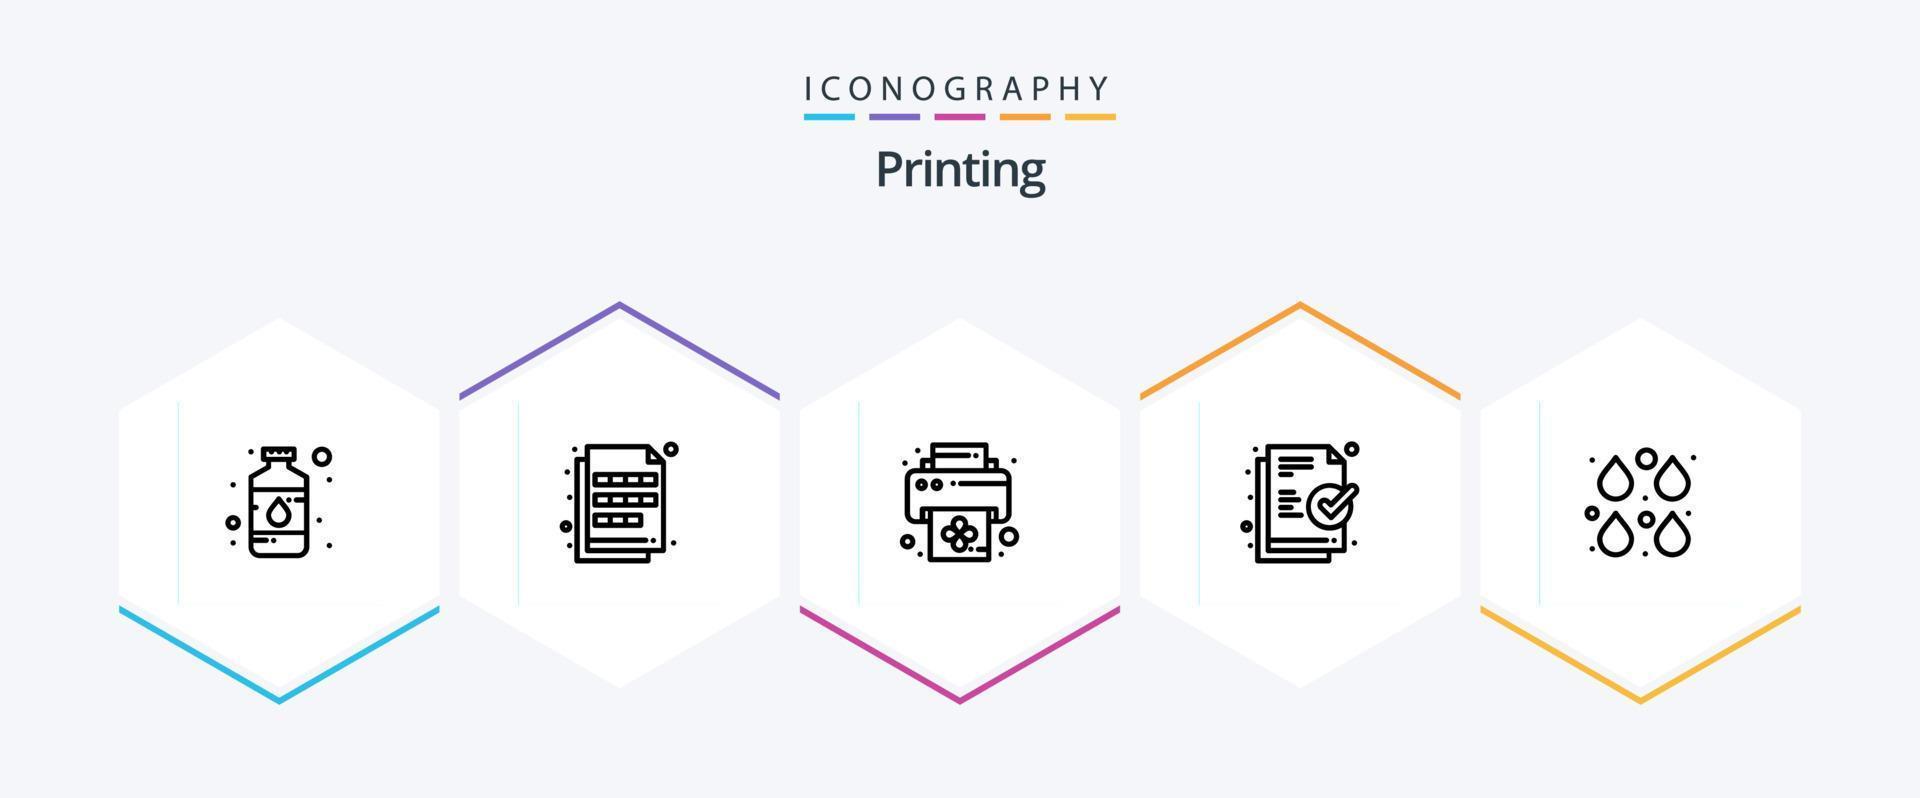 Printing 25 Line icon pack including drop. ready. imaging. file. printer vector